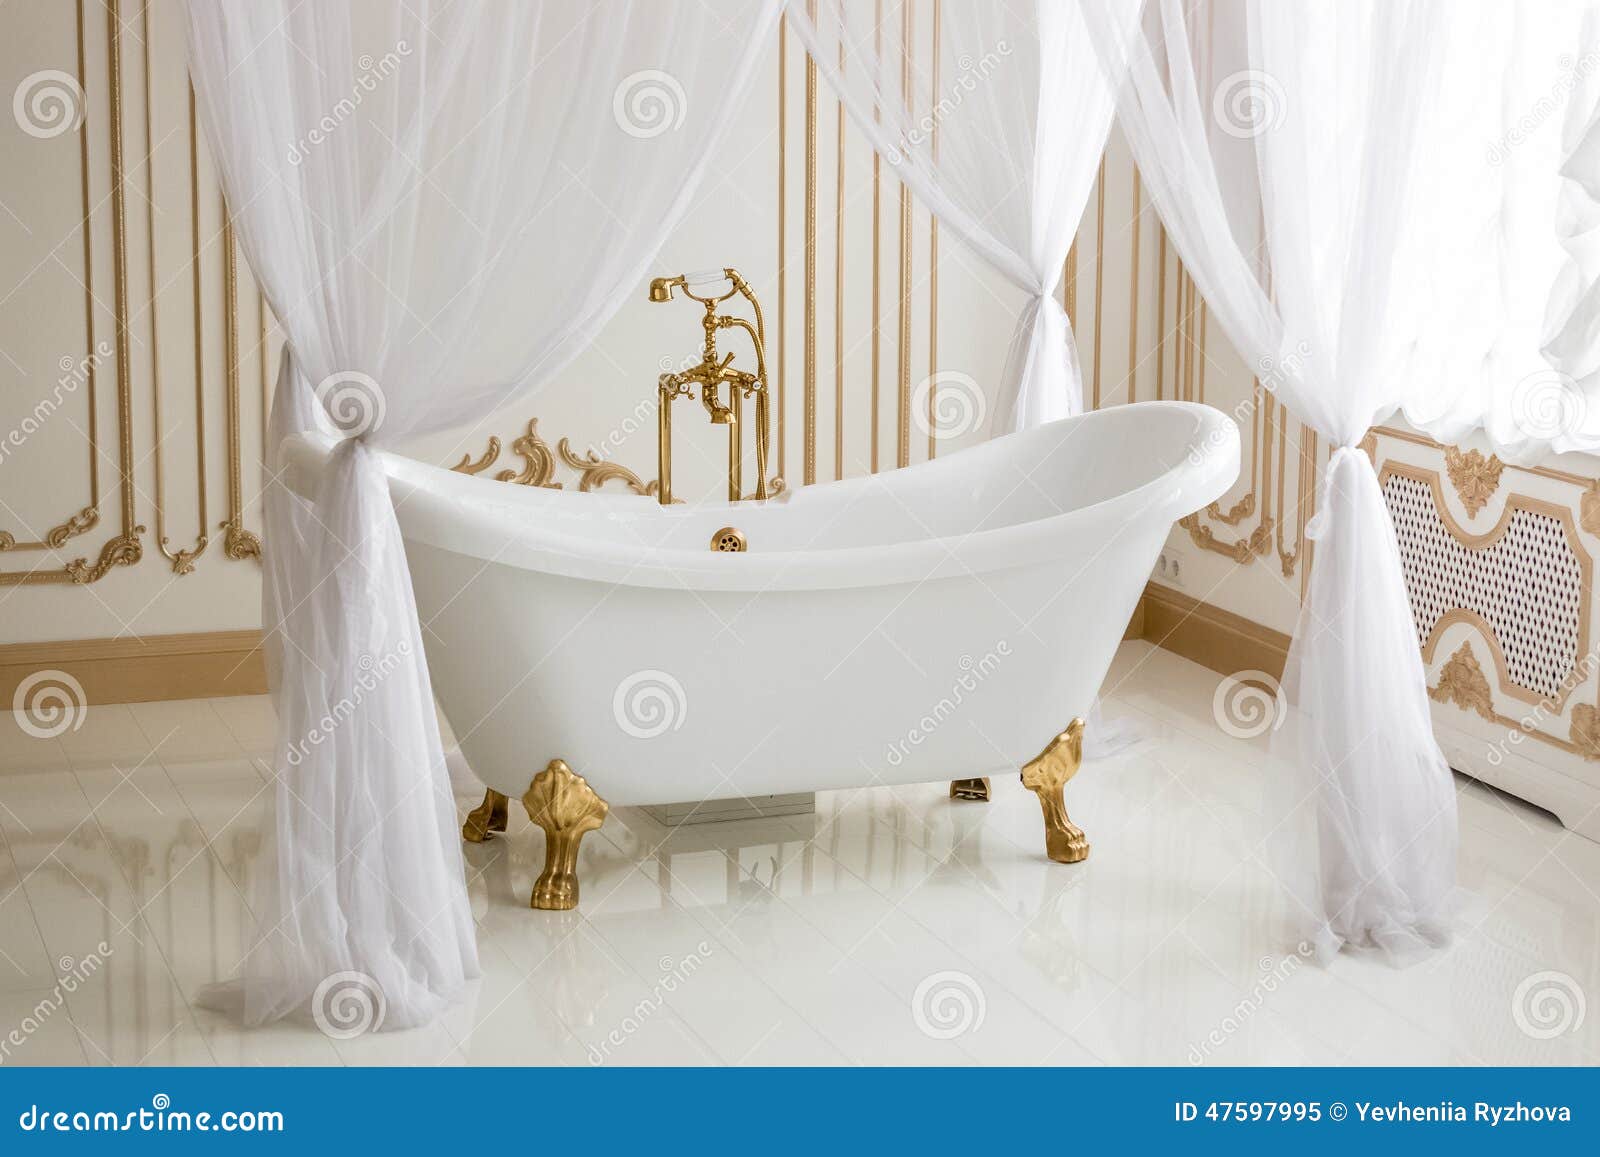 White Luxurious Bath with Golden Legs at Bathroom Stock Image - Image ...